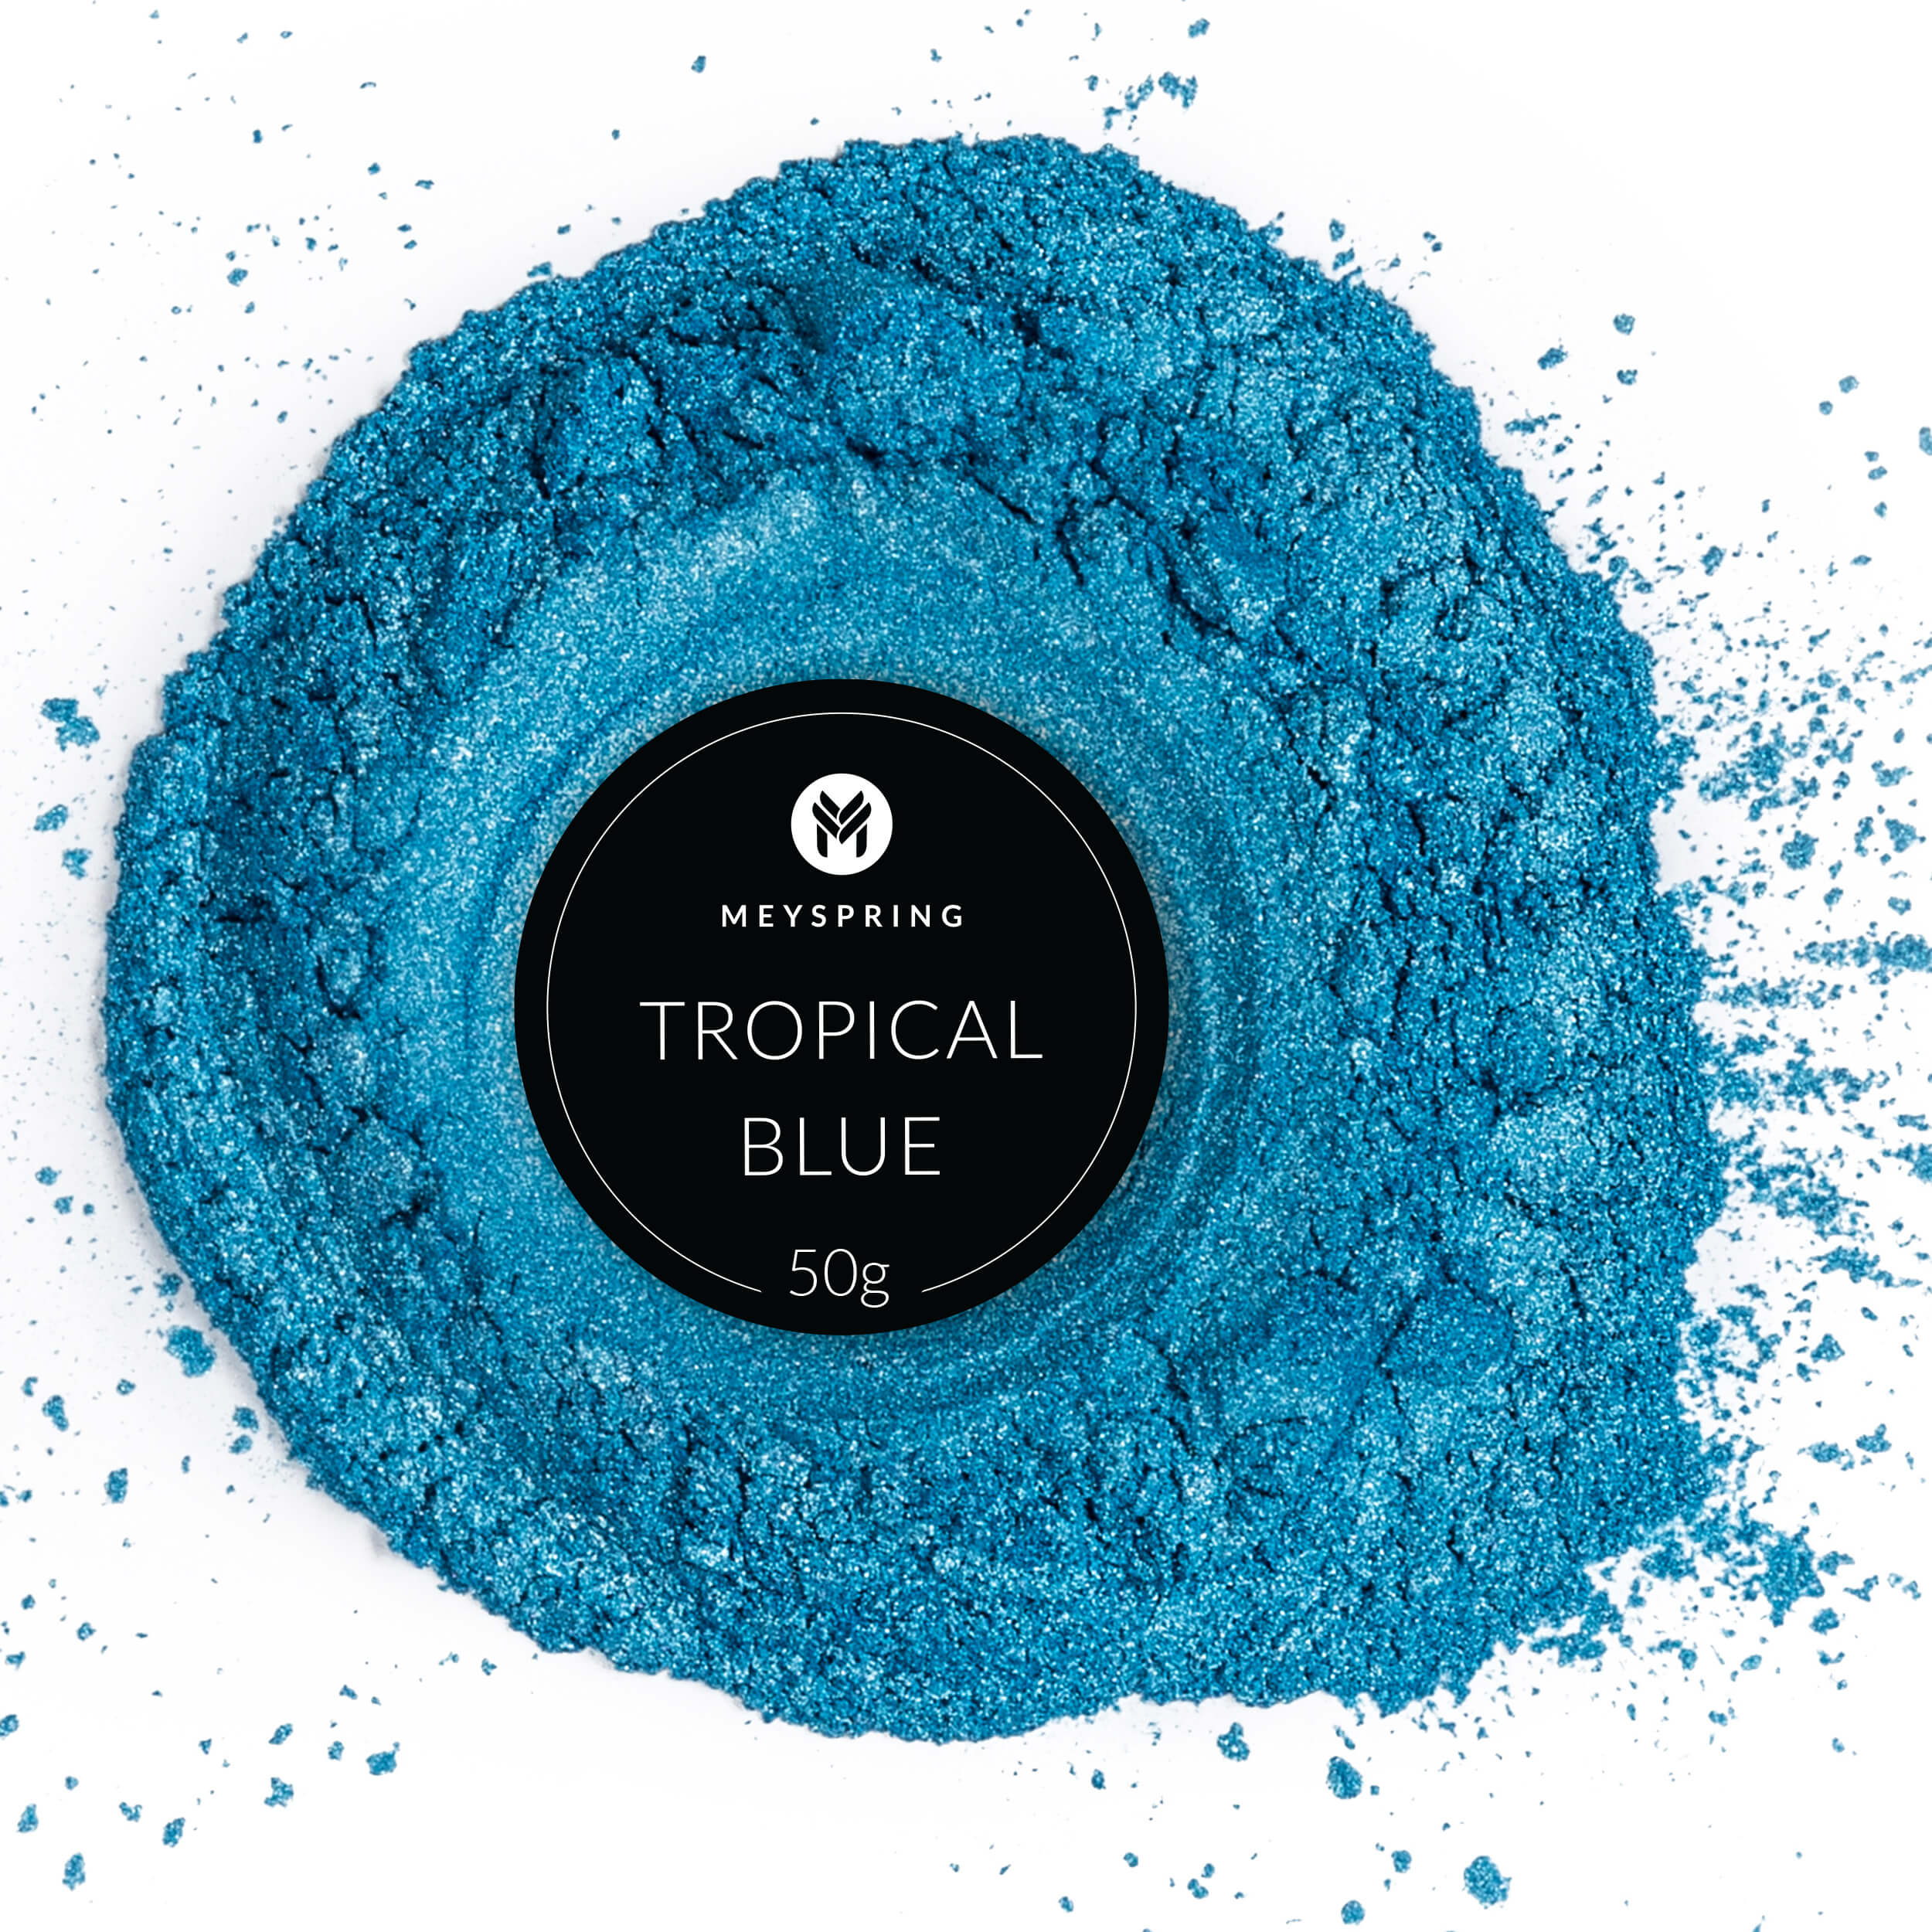 MEYSPRING Tropical Blue Mica Powder for Epoxy Resin - Dazzling Seascapes,  UV Resin, & River Tables! 